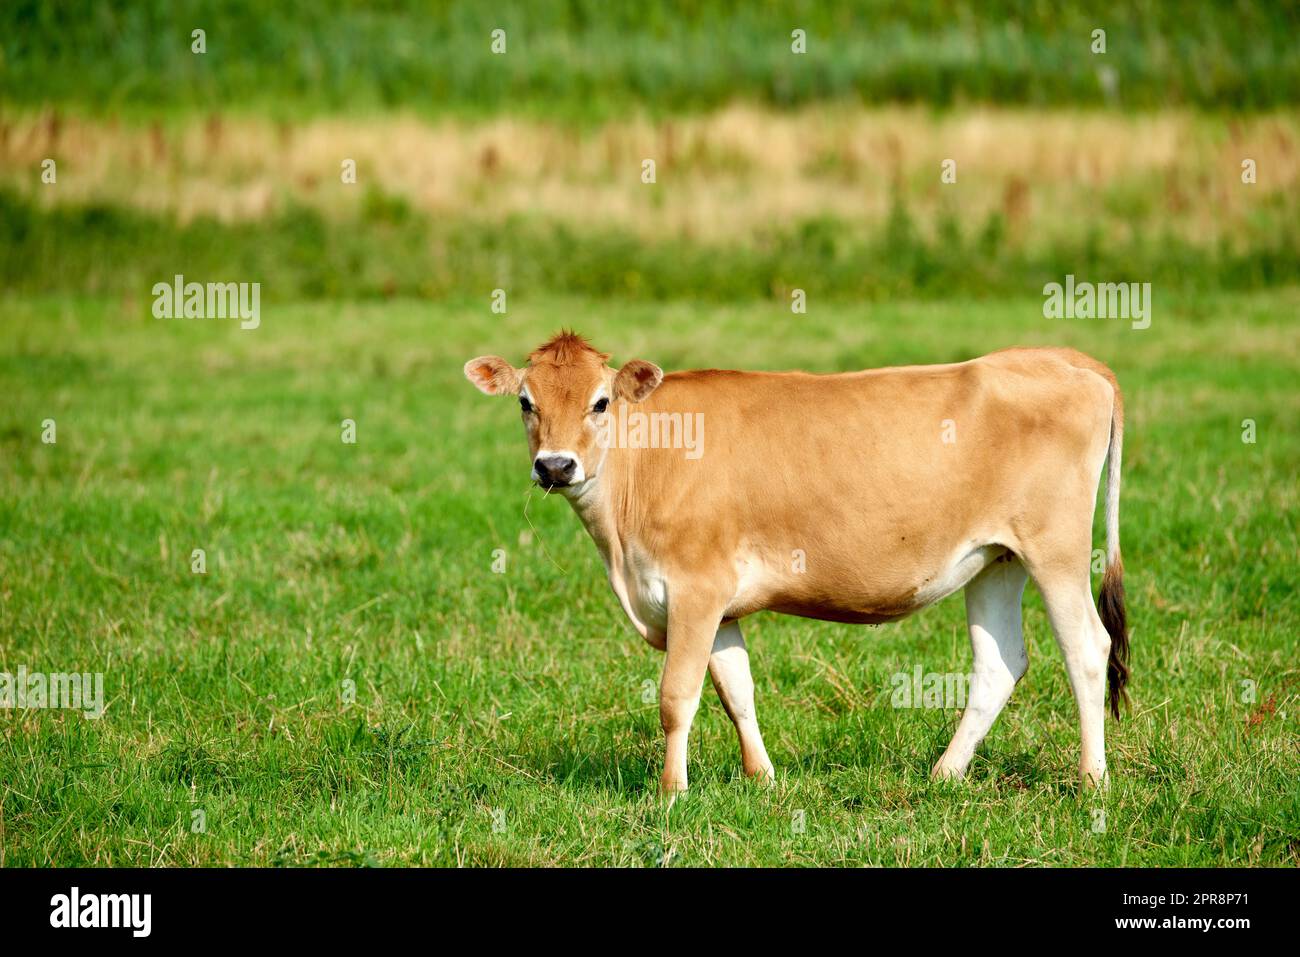 Cow on a farm for meat industry and the production of food for human consumption. Beef is a form of protein that helps maintain good health. Poultry is sold to butchers and grocery stores for eating Stock Photo